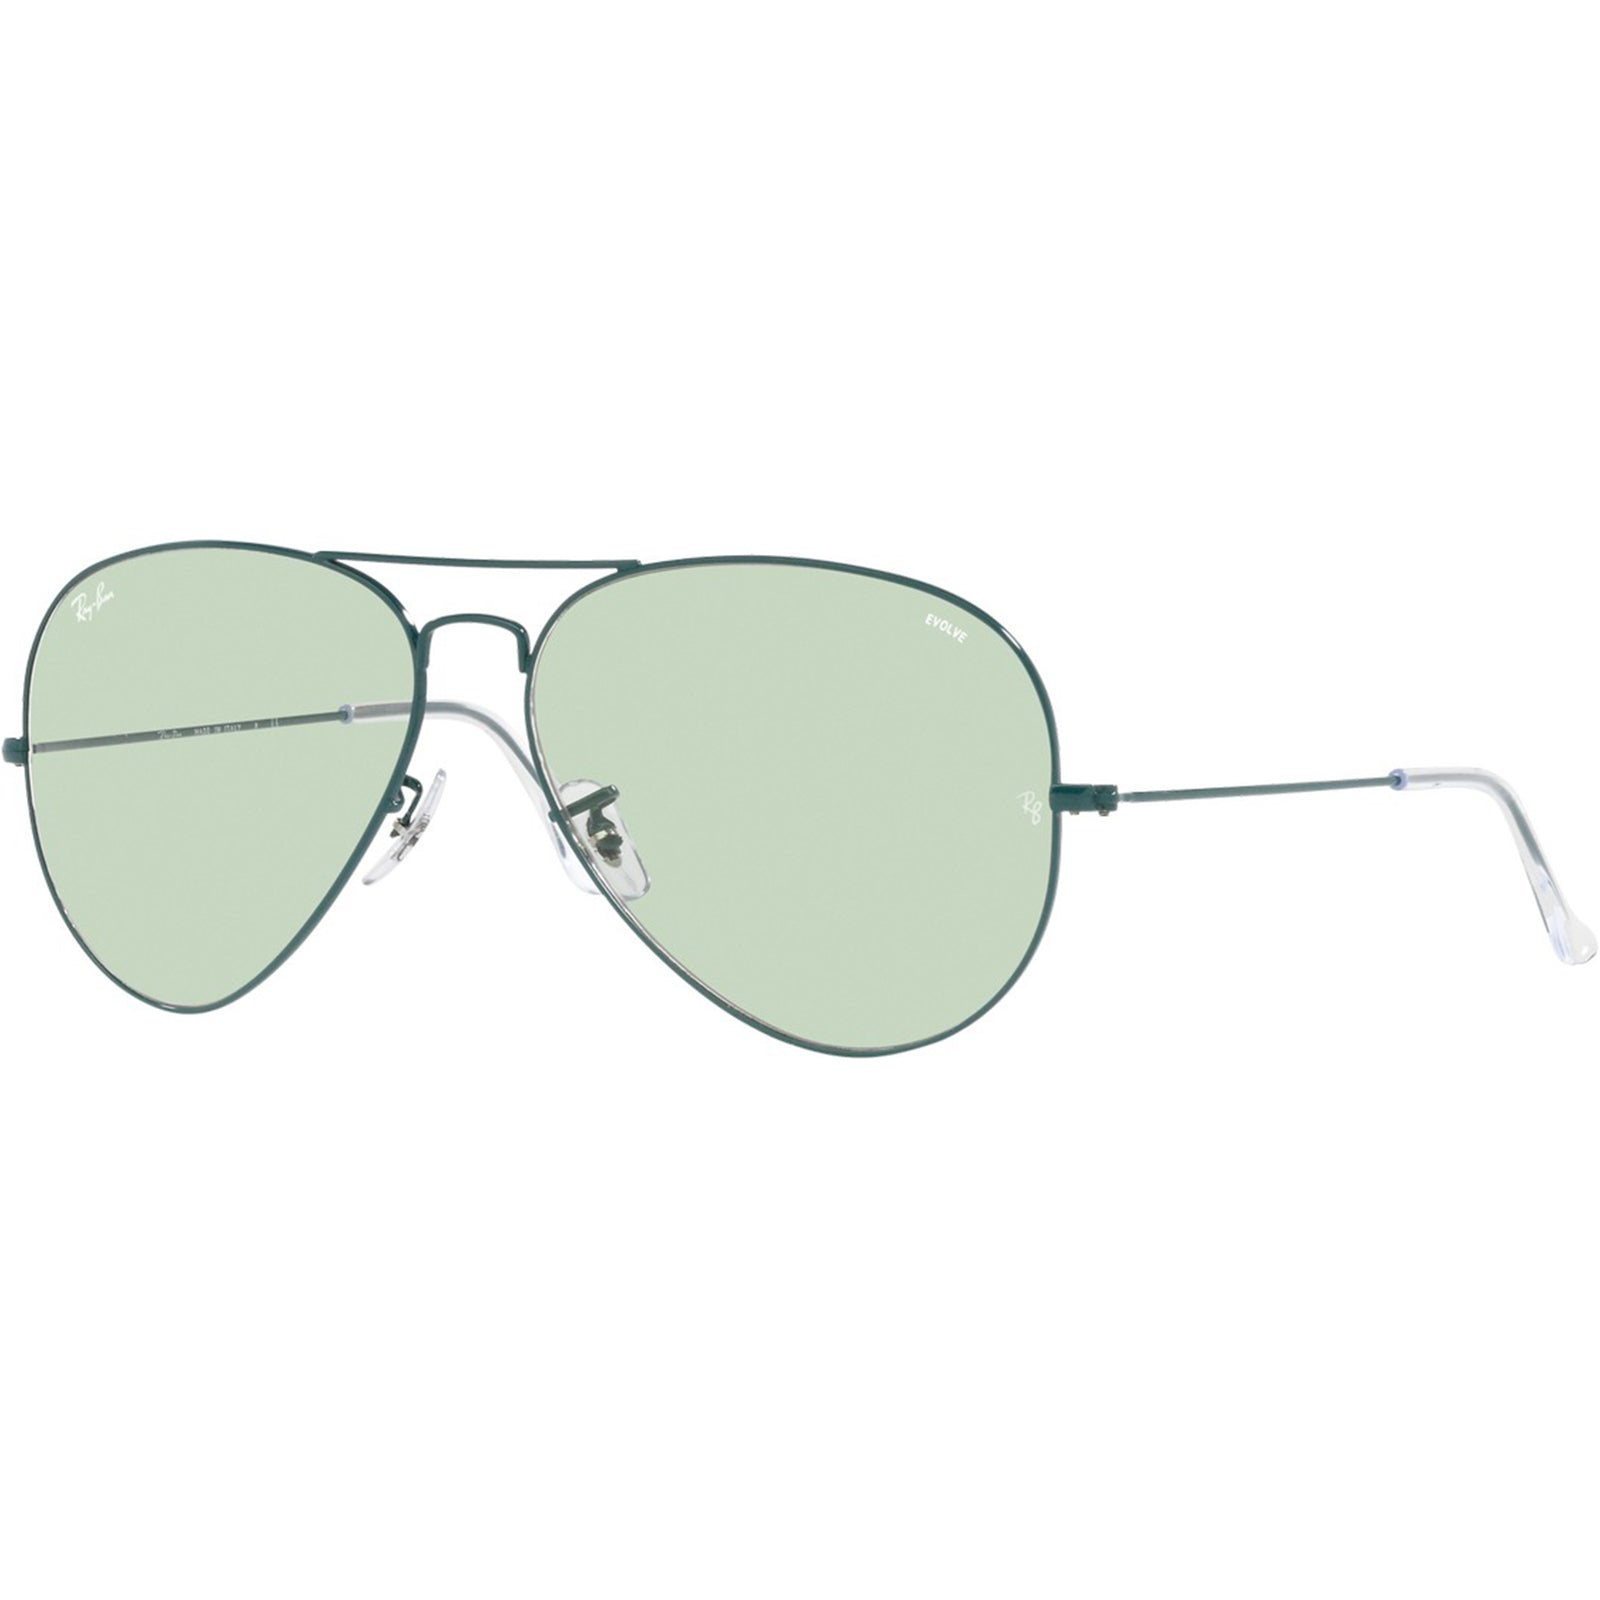 Ray-Ban Solid Evolve Adult Aviator Polarized Sunglasses-0RB3025